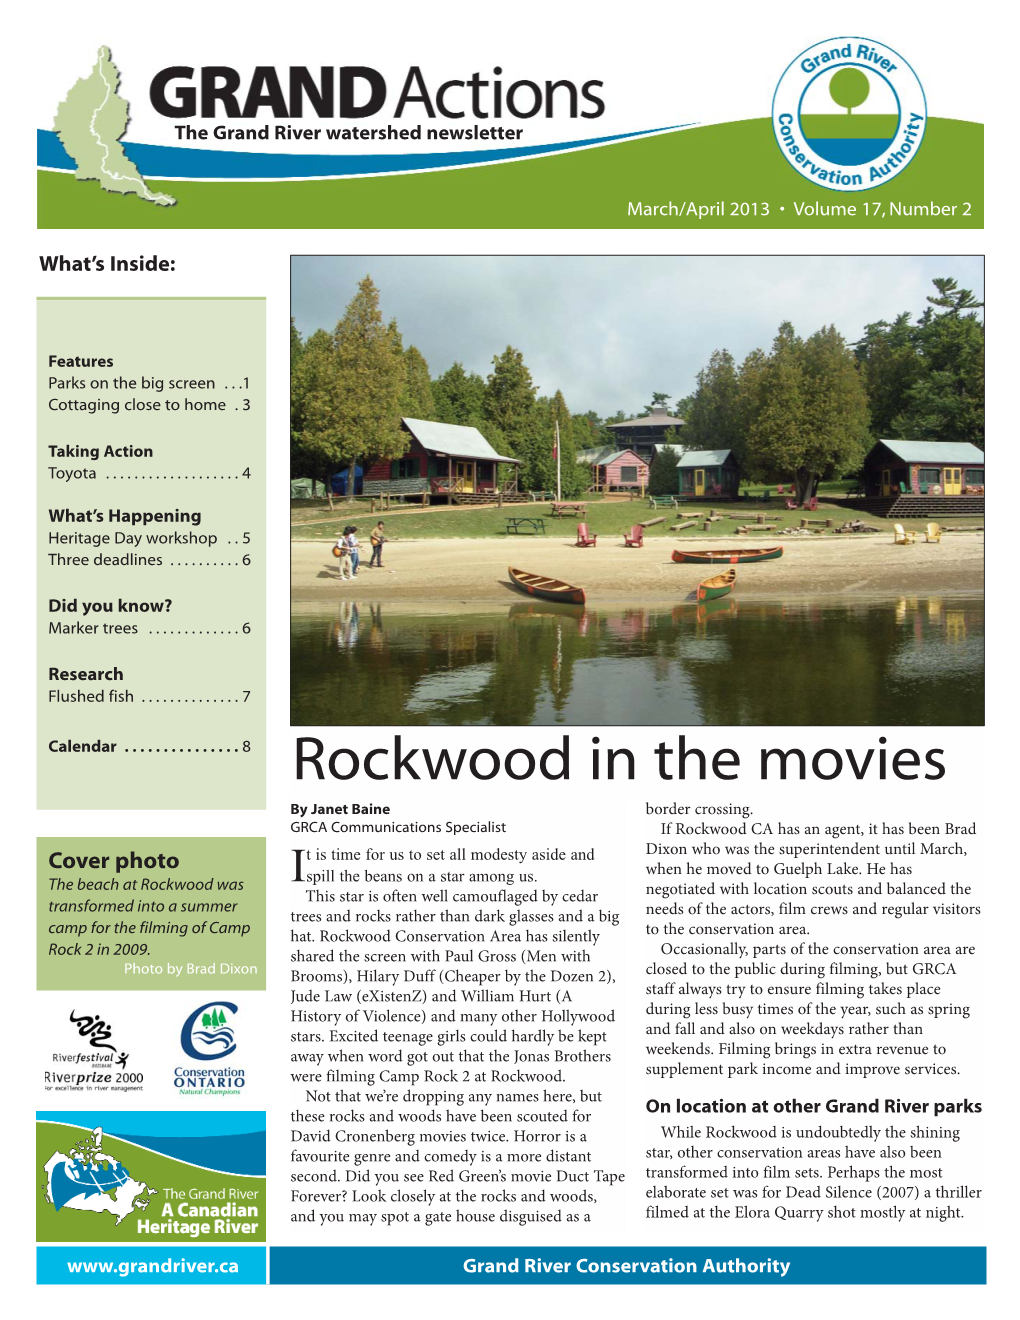 Rockwood in the Movies by Janet Baine Border Crossing